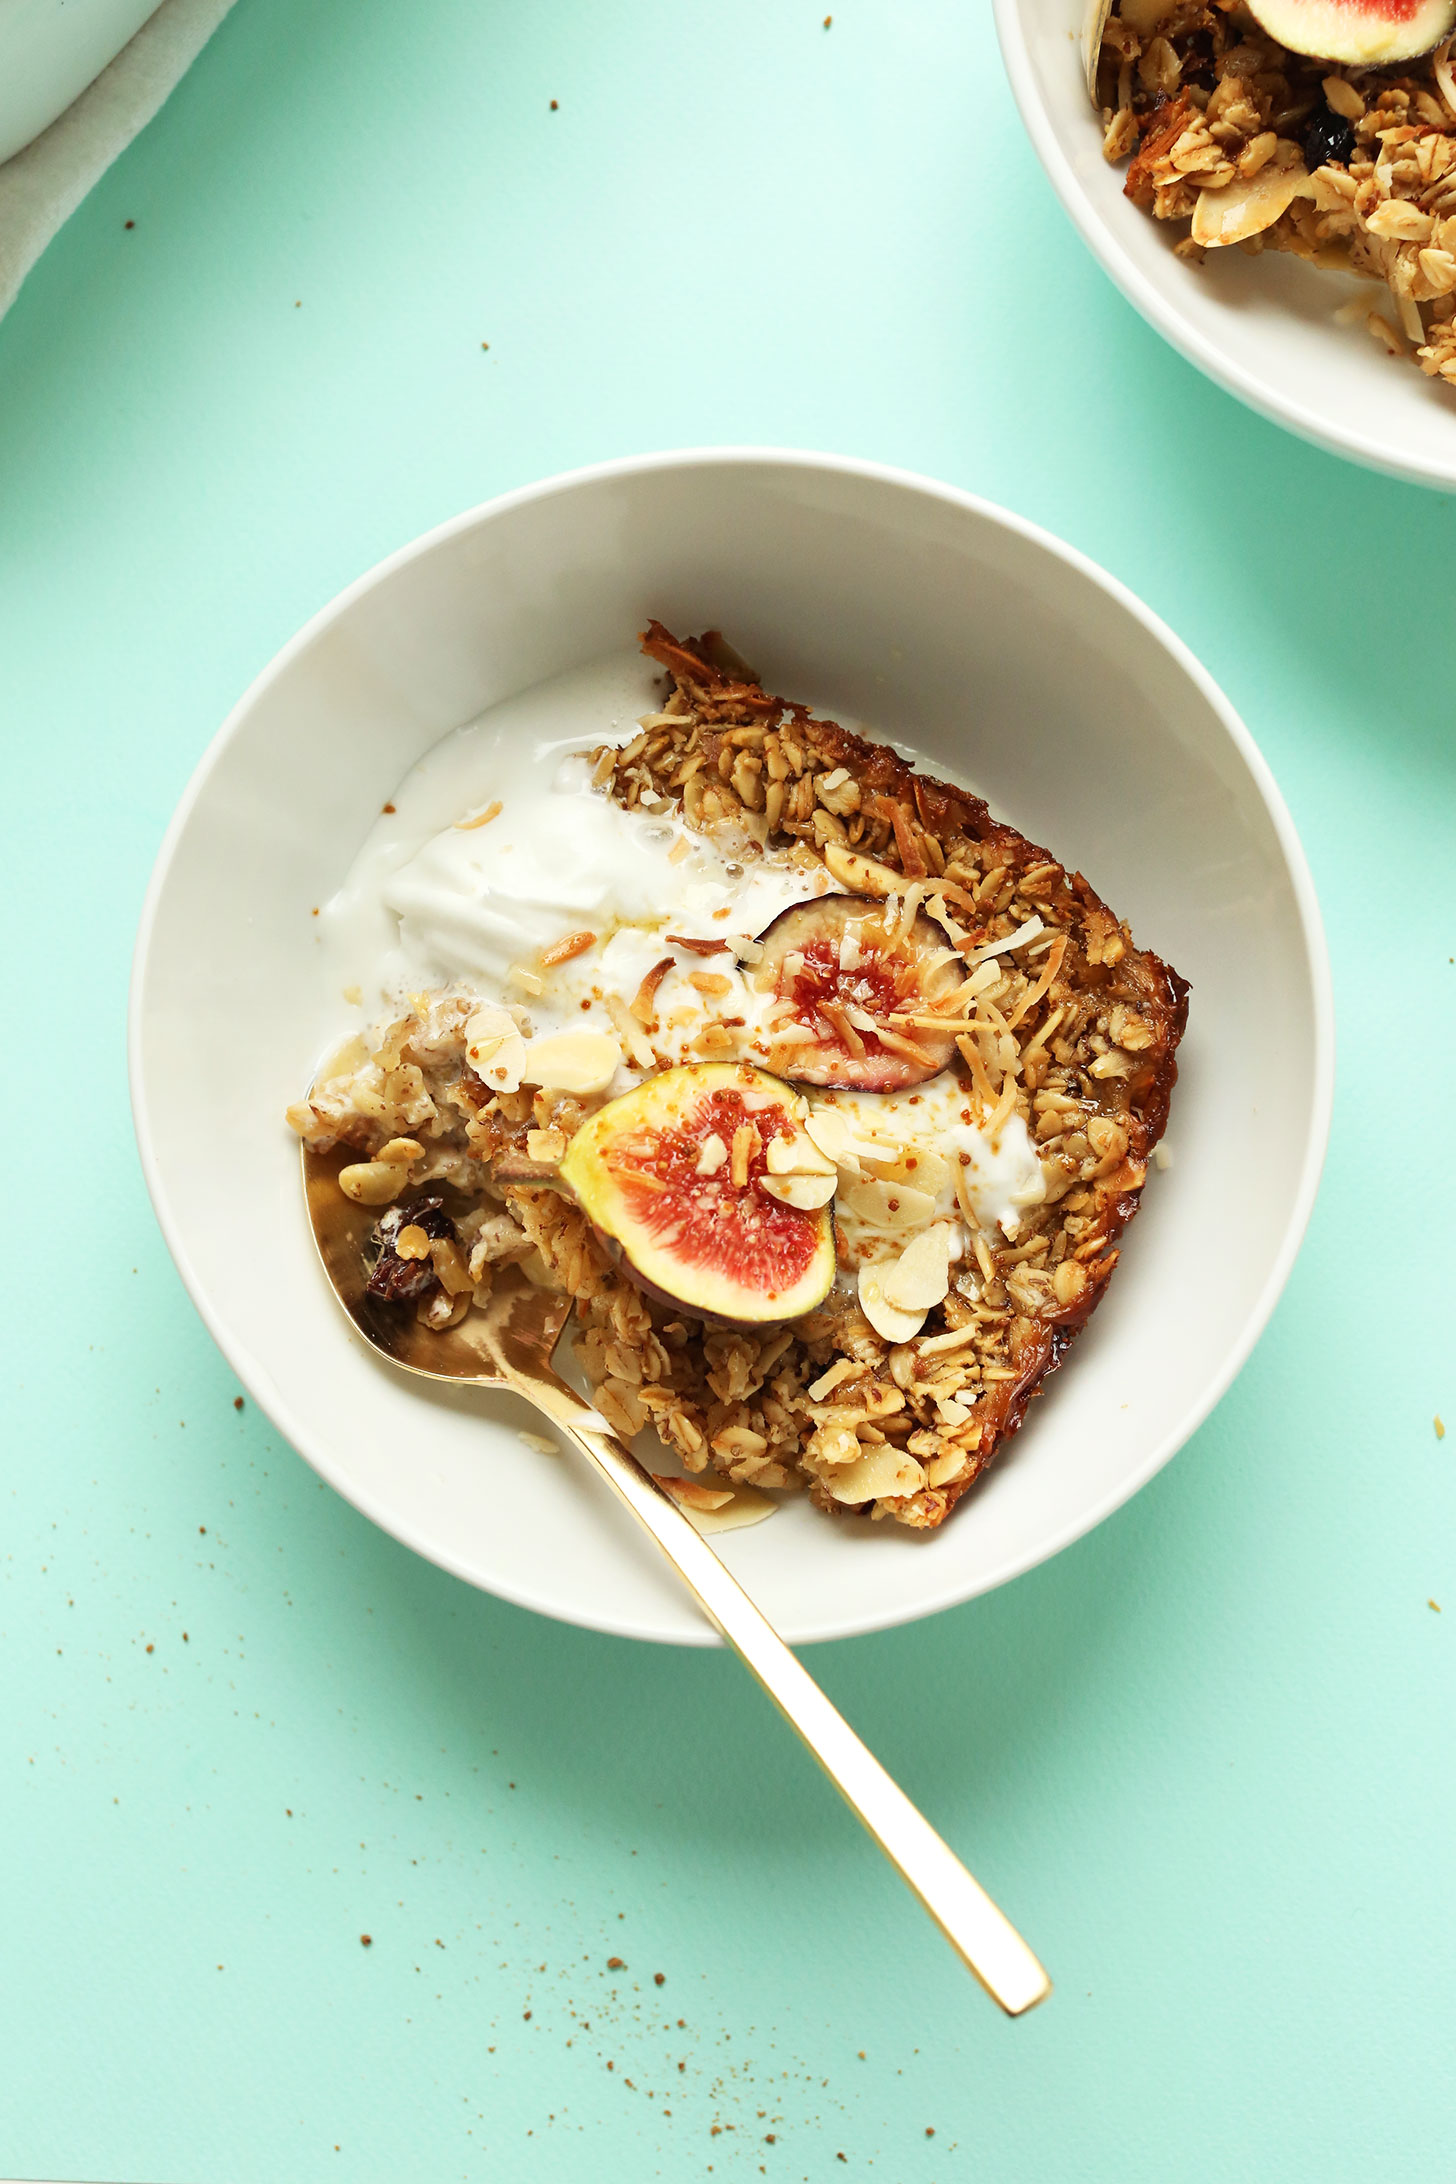 Bowl of our gluten-free vegan Toasted Coconut Baked Oatmeal recipe topped with fresh figs